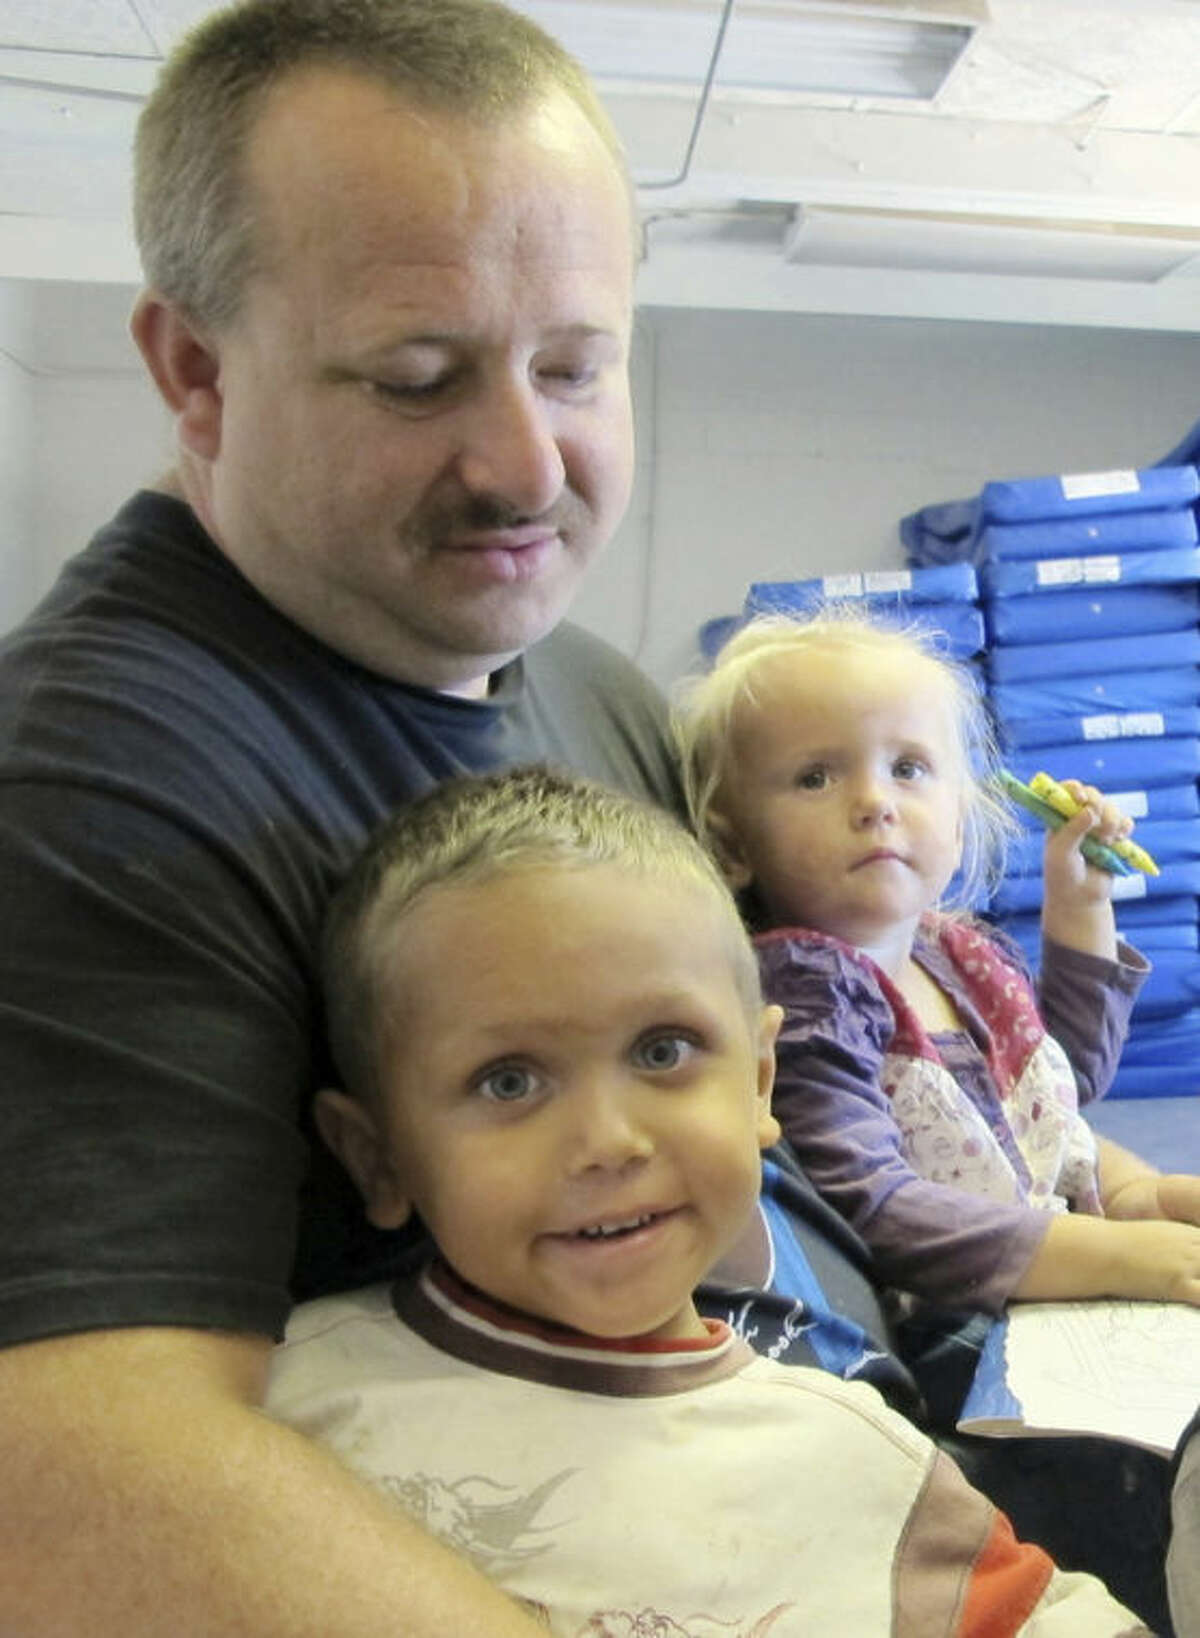 This June 20, 2013 image shows William Roper holding his 4-year-old son William Jr. and 2-year-old daughter Kacie during an interview at Joy Junction homeless shelter in Albuquerque, N.M. A report released by the Annie E. Casey Foundation shows the number of children living in poverty increased to 23 percent in 2011. The survey ranks New Mexico as the worst in the nation when it comes to child well-being. (AP Photo/Susan Montoya Bryan)